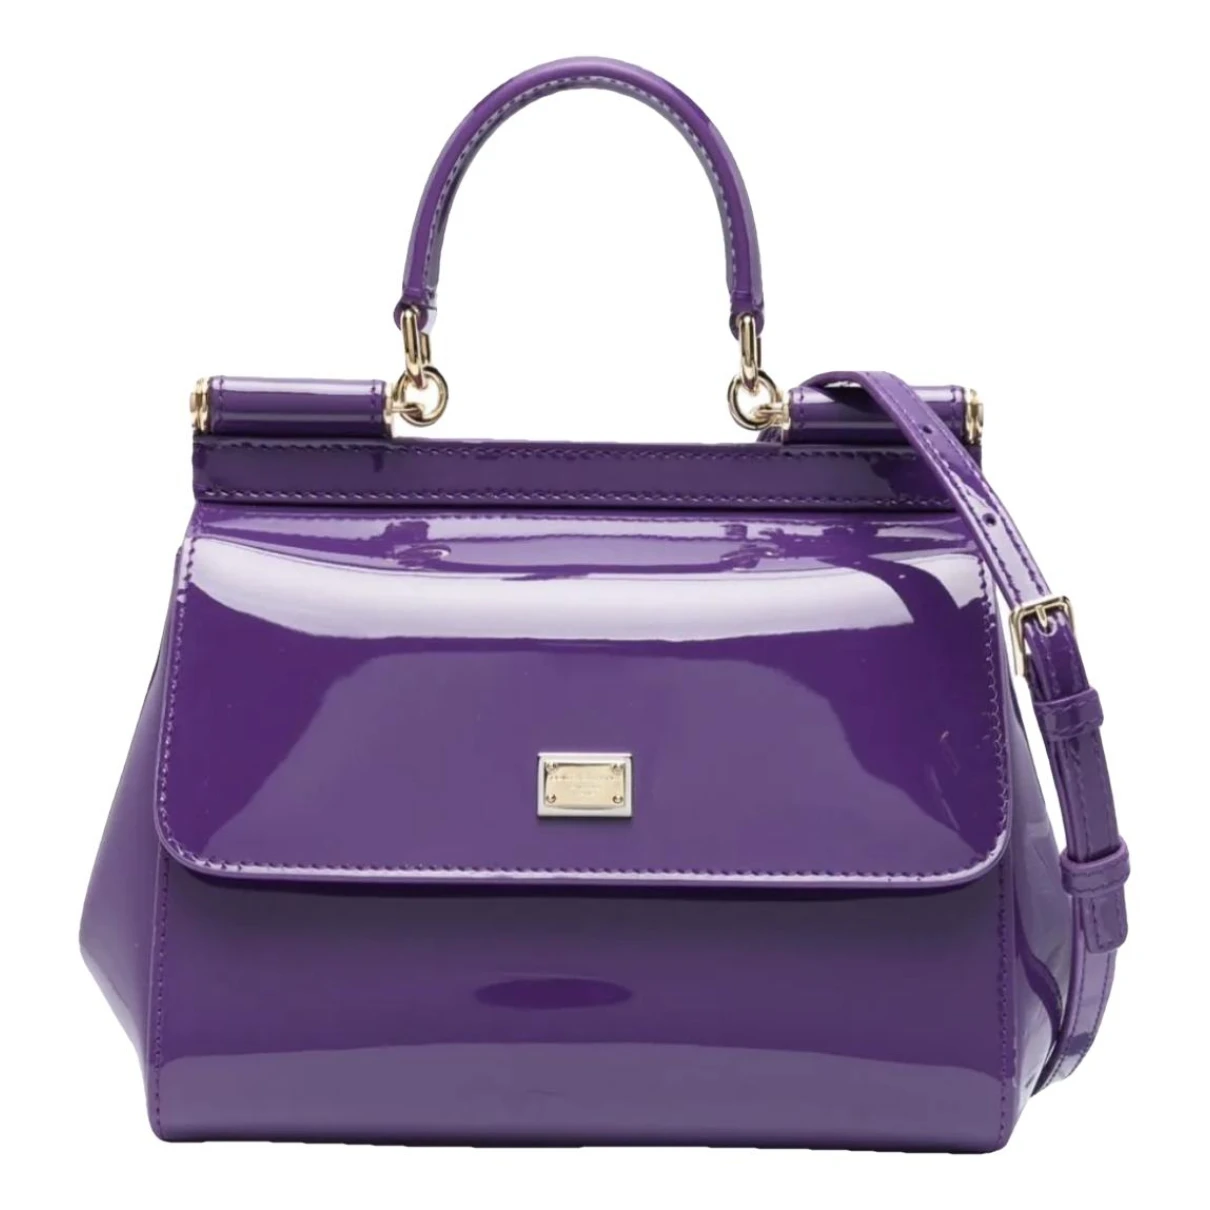 Pre-owned Dolce & Gabbana Sicily Patent Leather Handbag In Purple